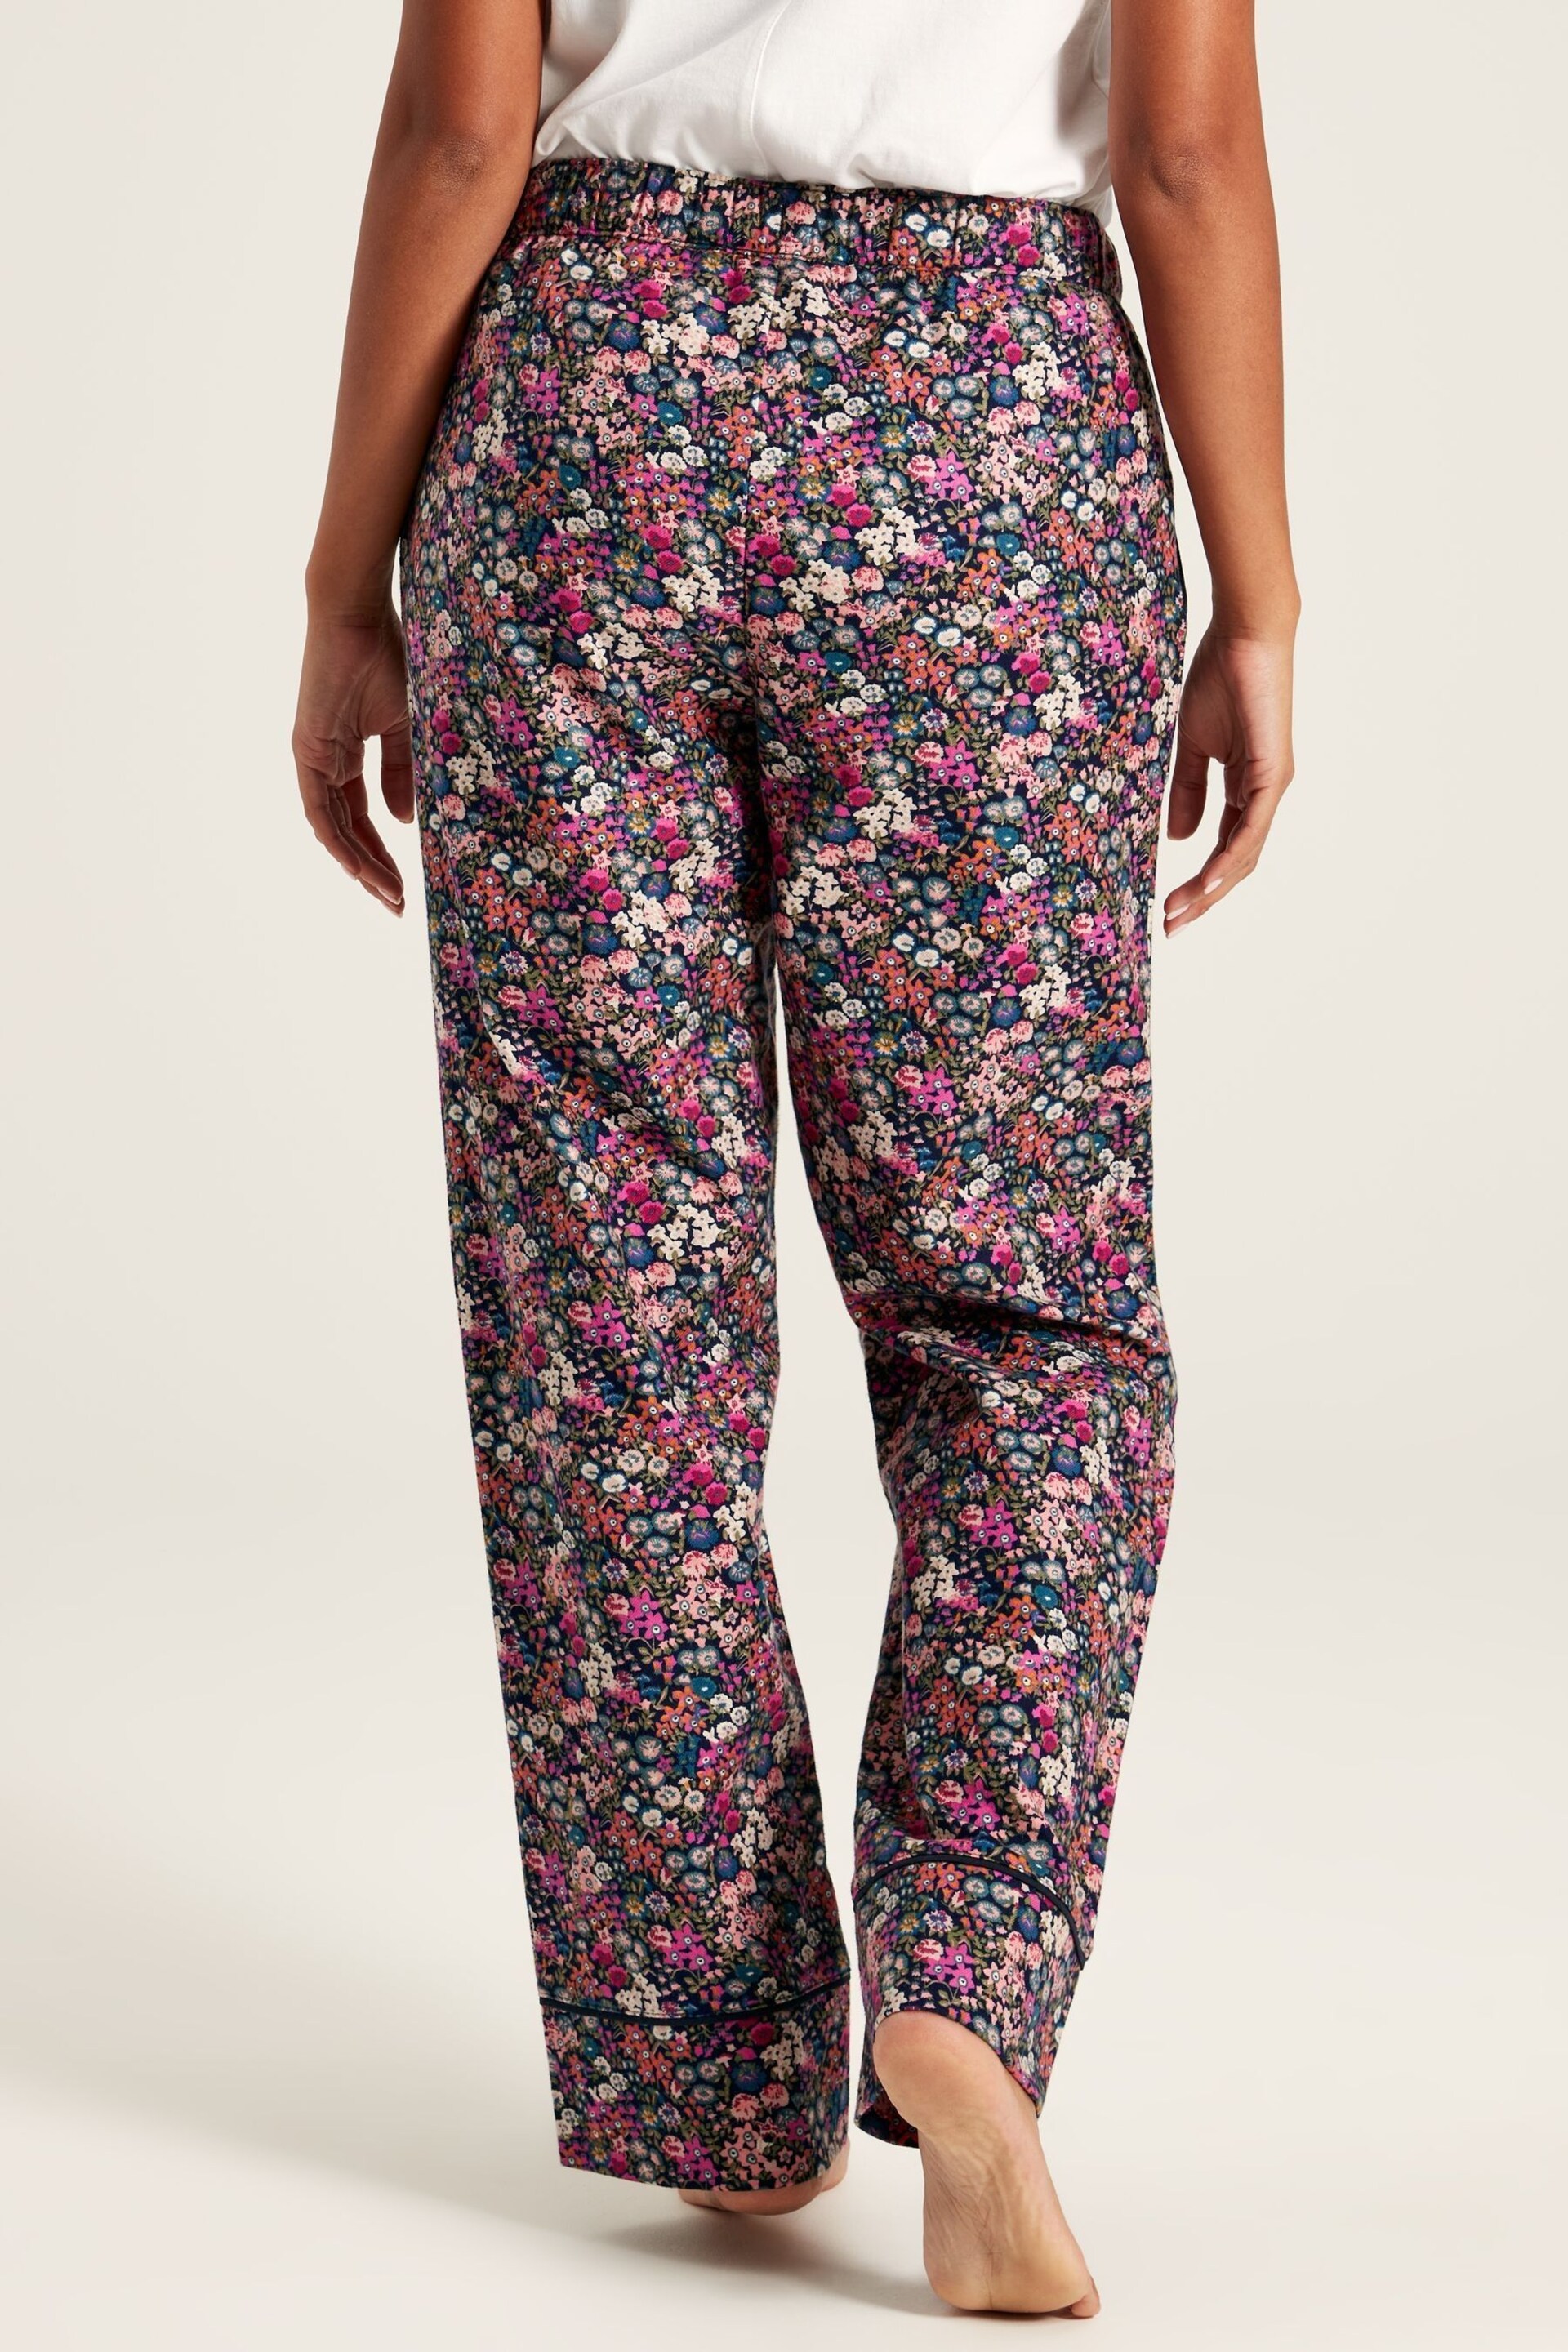 Joules Stella Navy Floral Cotton Pyjama Bottoms - Image 2 of 7